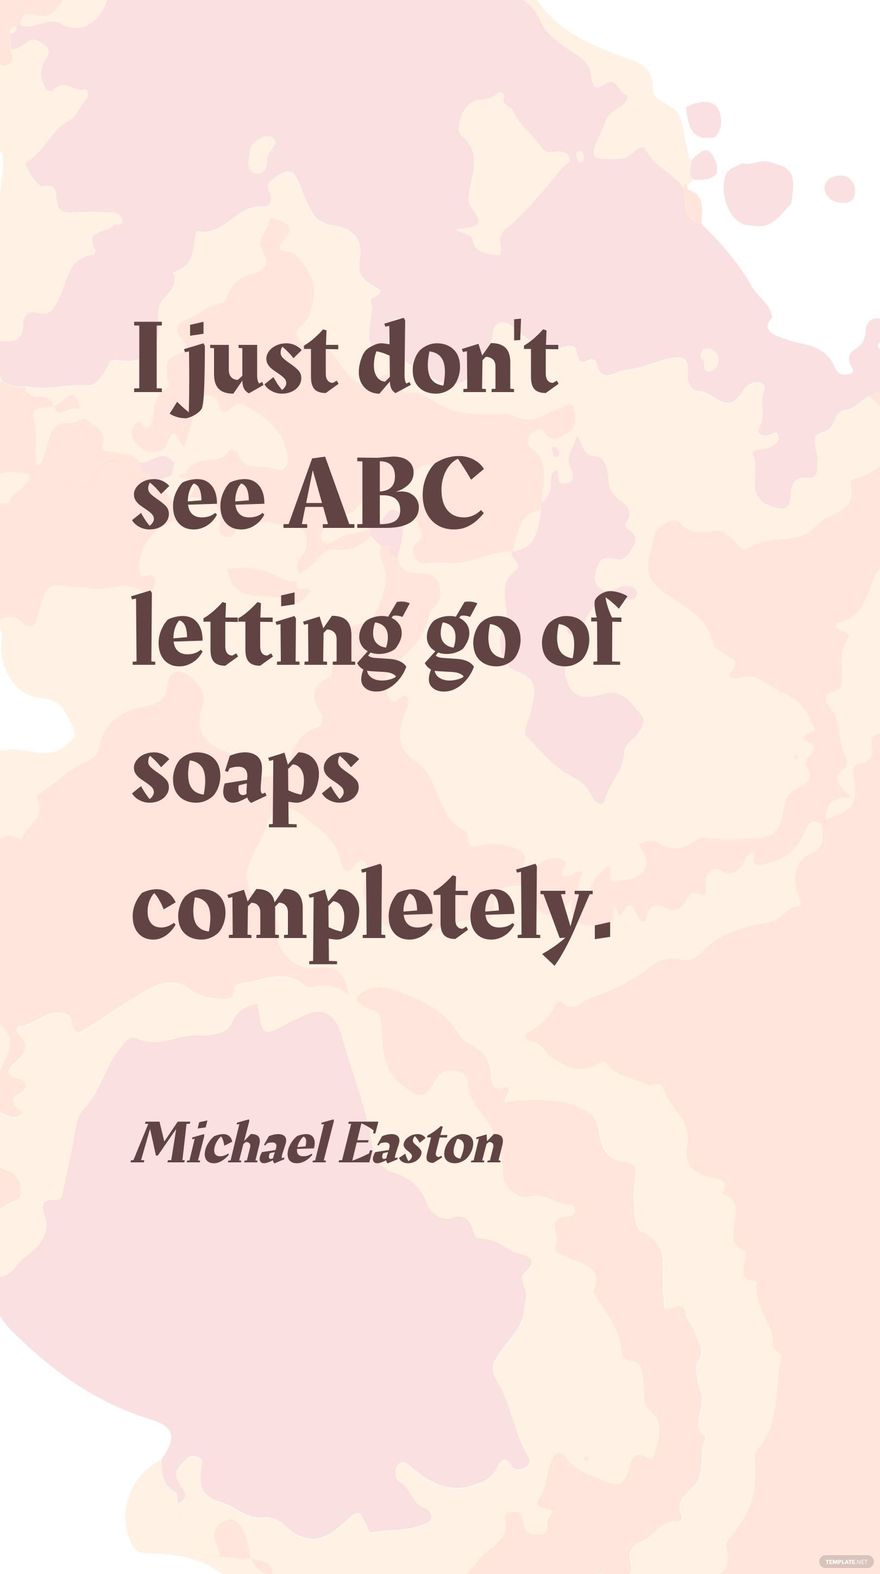 Free Michael Easton - I just don't see ABC letting go of soaps completely. in JPG